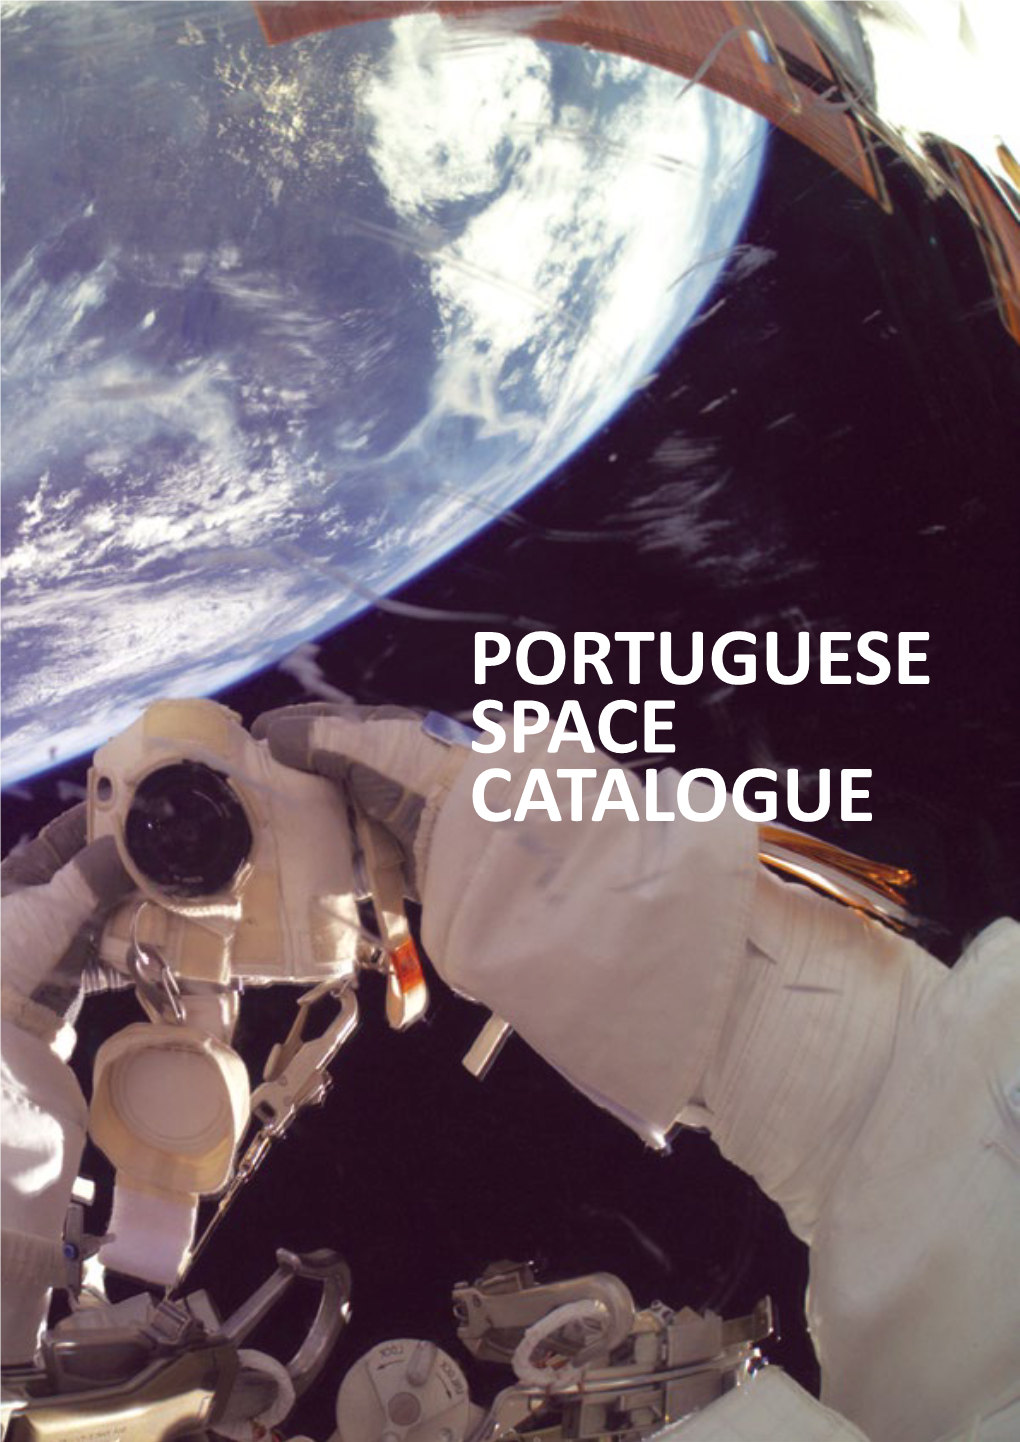 PORTUGUESE SPACE CATALOGUE PORTUGUESE SPACE CATALOGUE Fundação Para a Ciência E a Tecnologia (FCT) Is the National Funding Agency for Science and Research in Portugal